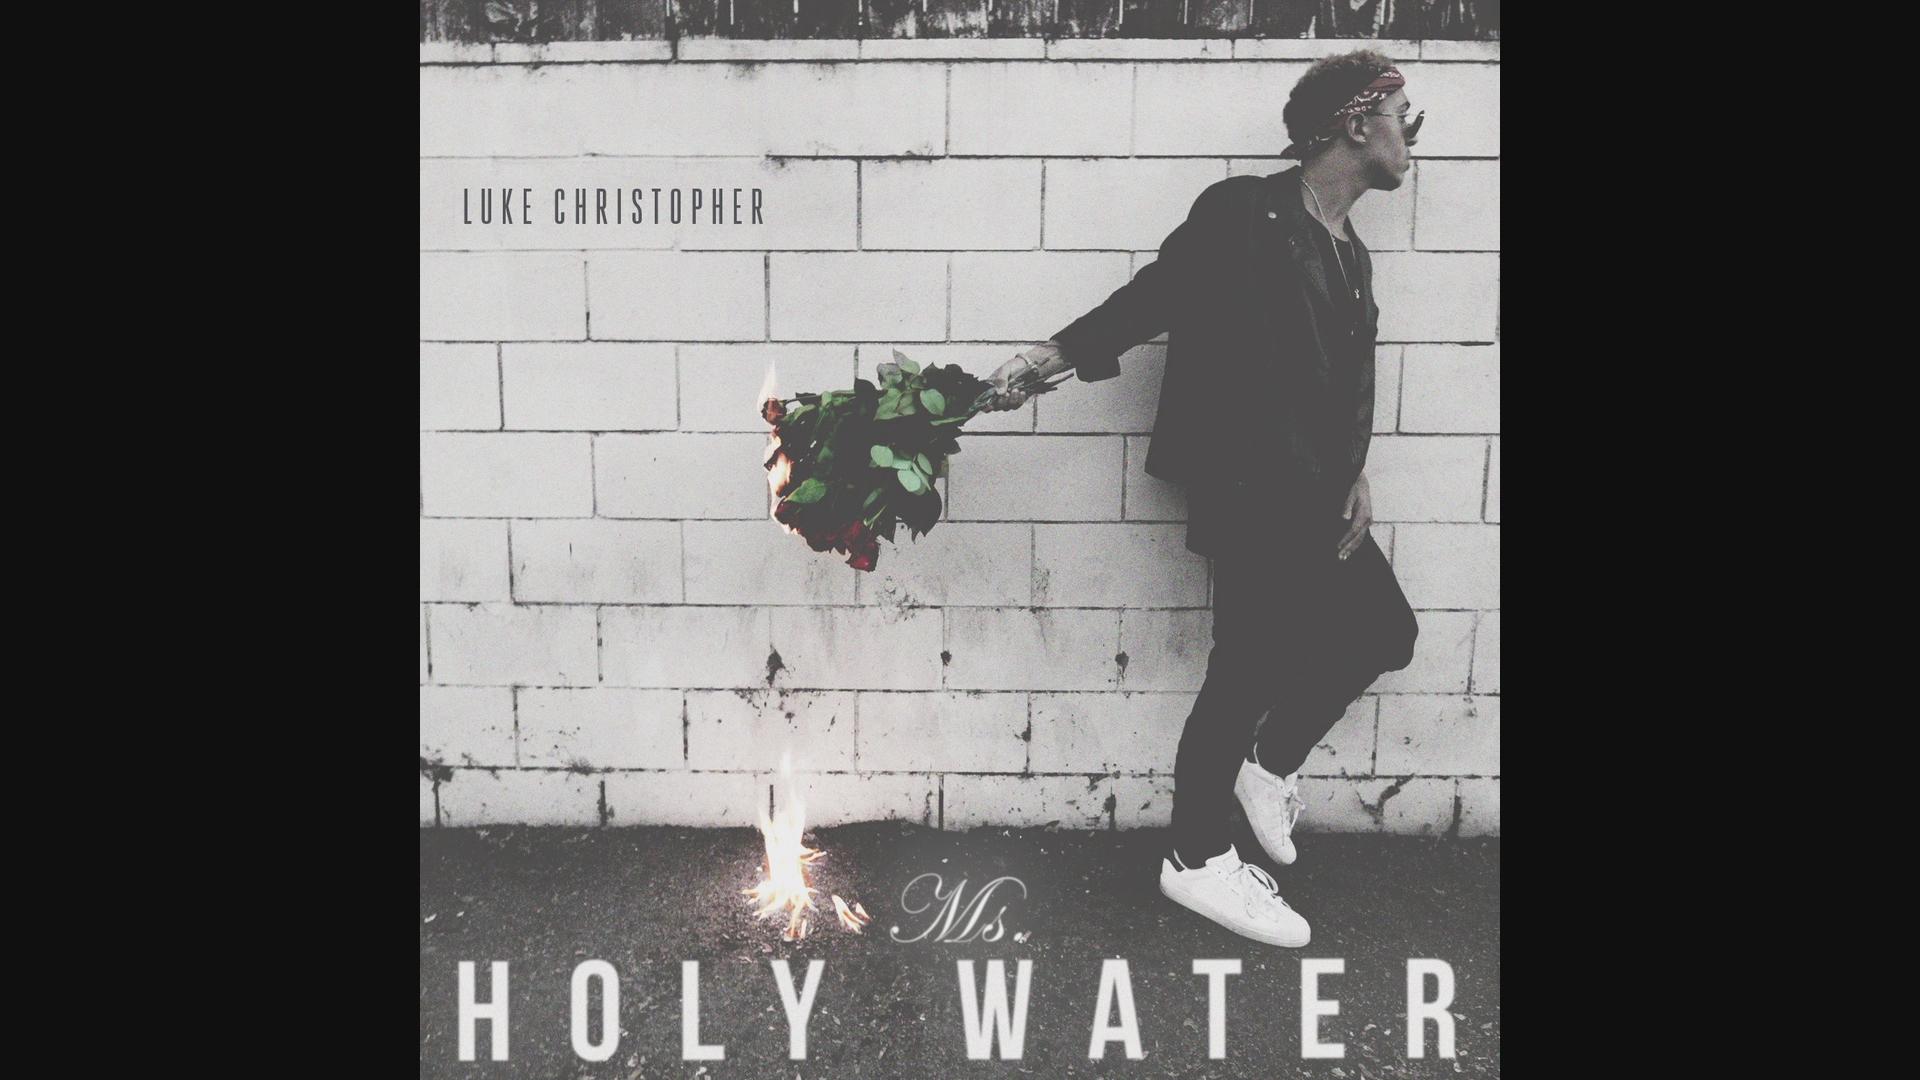 New Video: Luke Christopher “Ms. Holy Water”